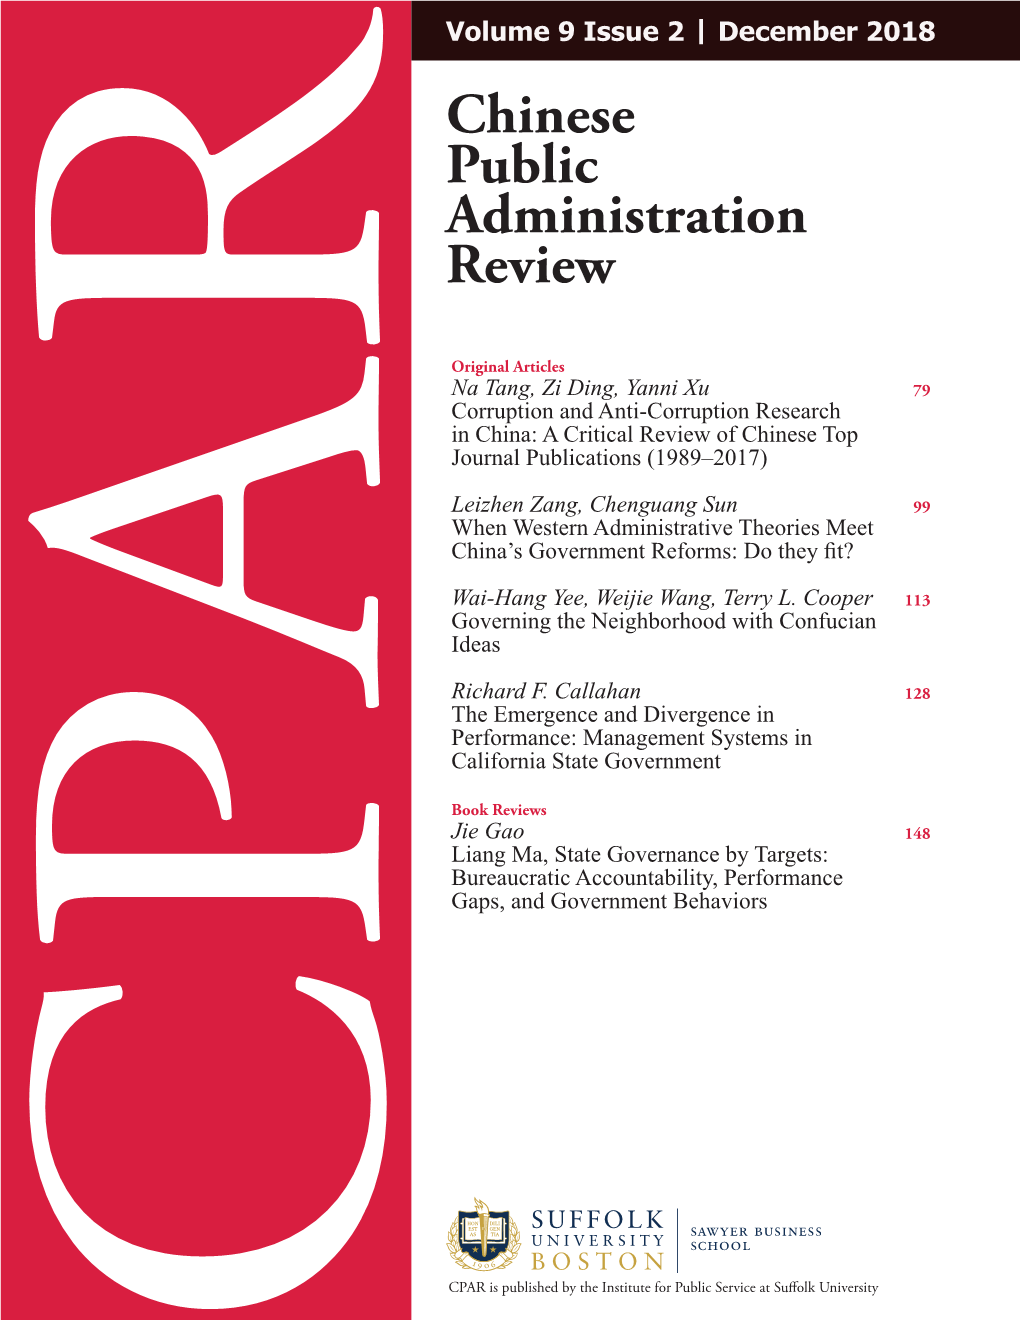 Chinese Public Administration Review Volume 9 Issue 2